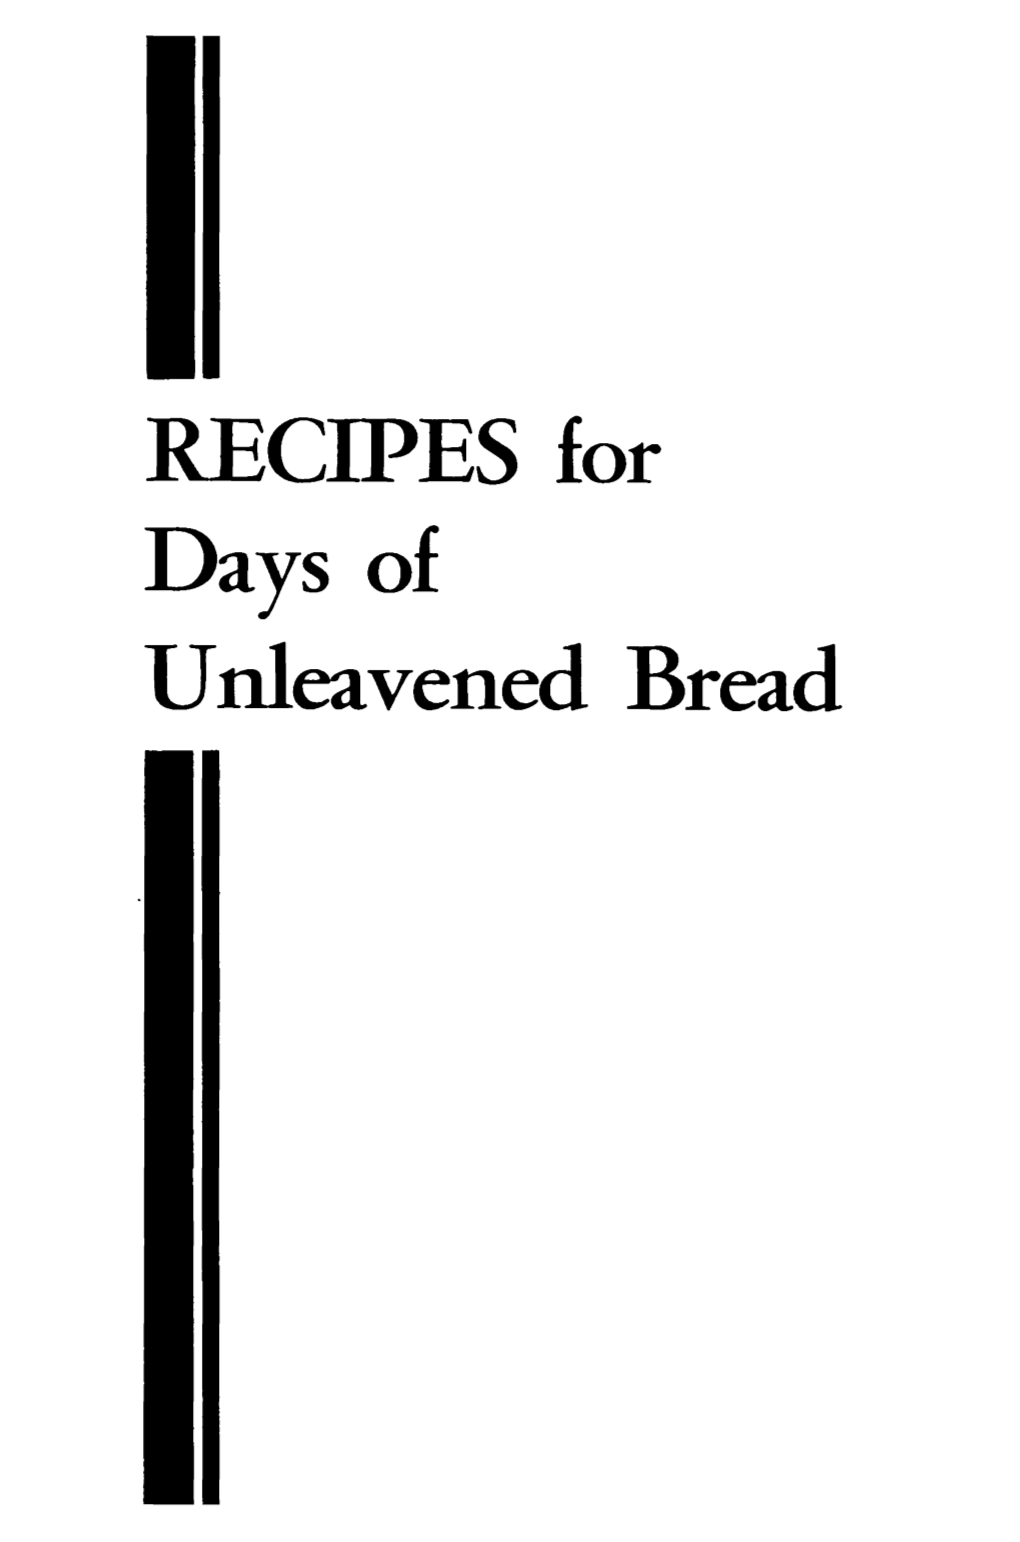 RECIPES for Days of Unleavened Bread RECIPES for Days of Unleavened Bread